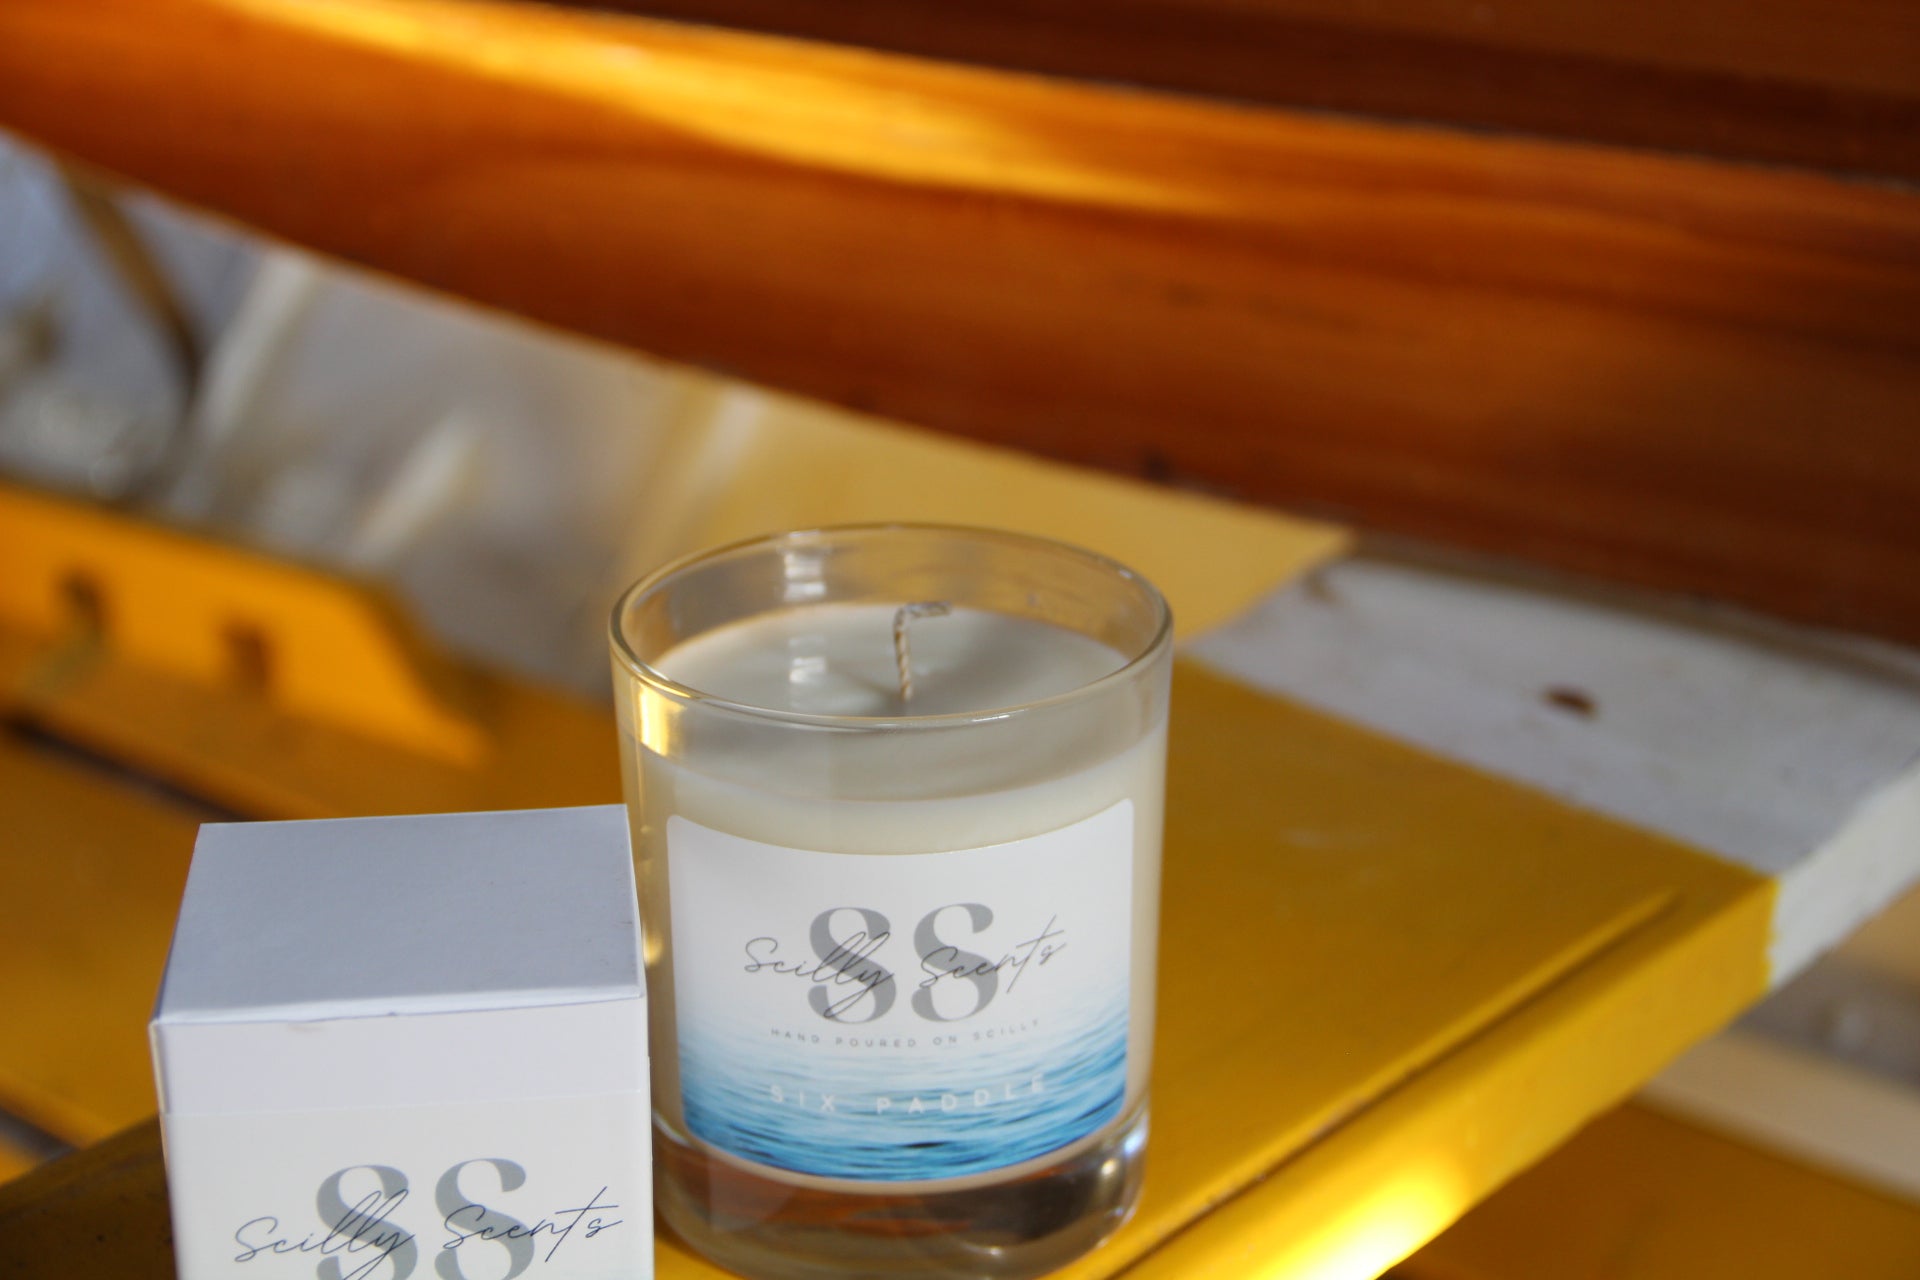 Six Paddle Limited Edition Candle